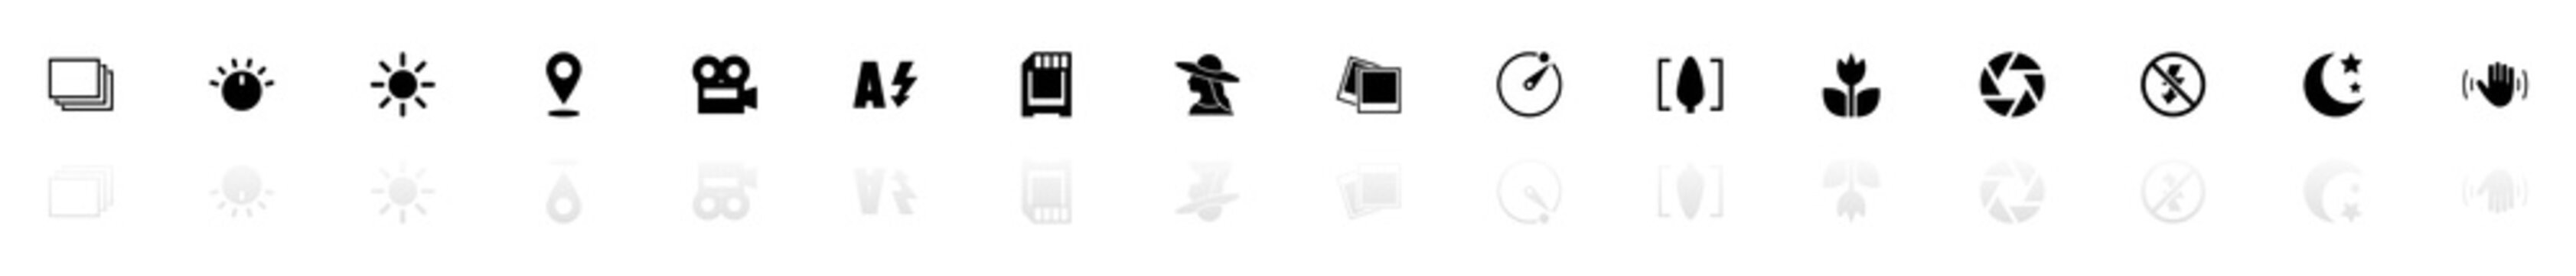 Photo Mode icons - Black horizontal Illustration symbol on White Background with a mirror Shadow reflection. Flat Vector Icon.